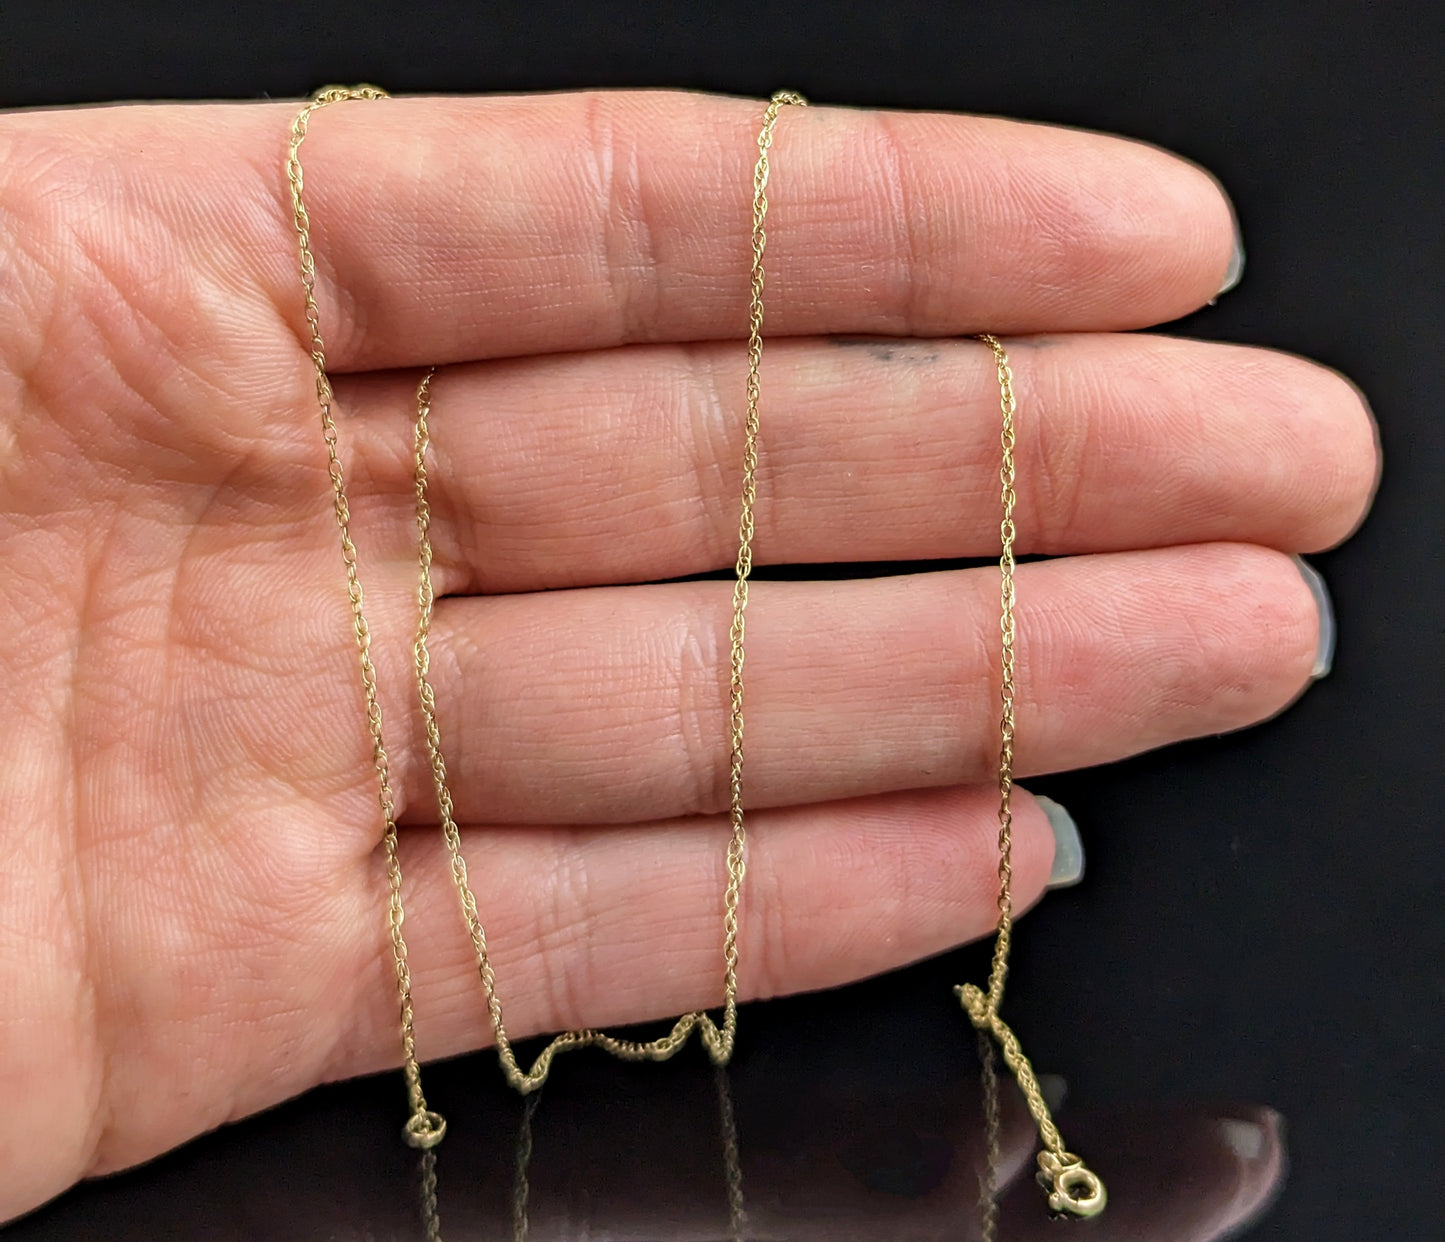 Vintage 9ct yellow gold trace chain necklace, dainty